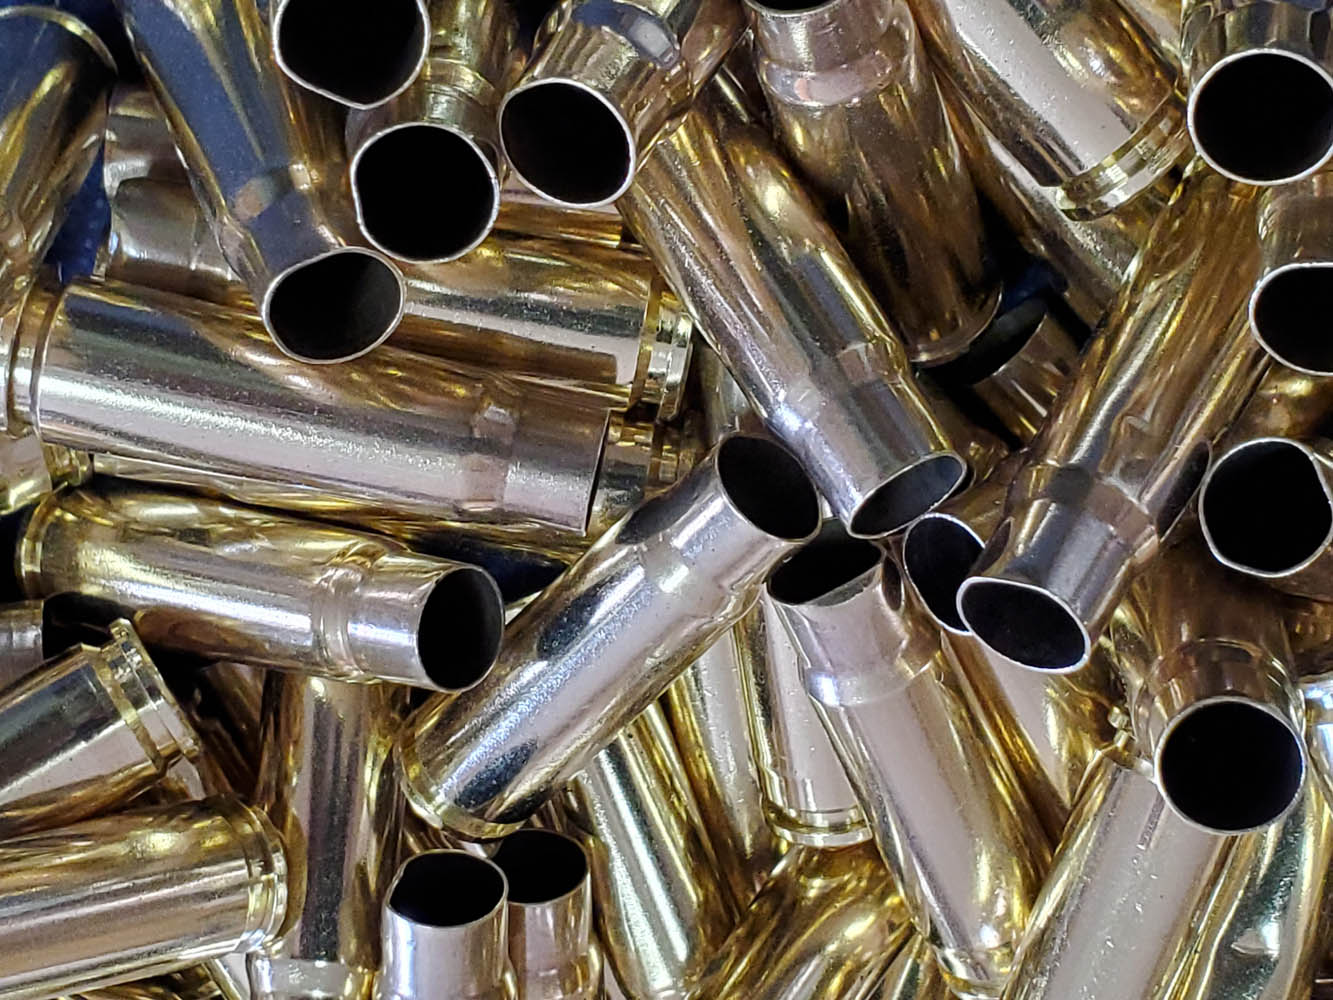 7.62x39 MM MIX Once Fired Brass Cases